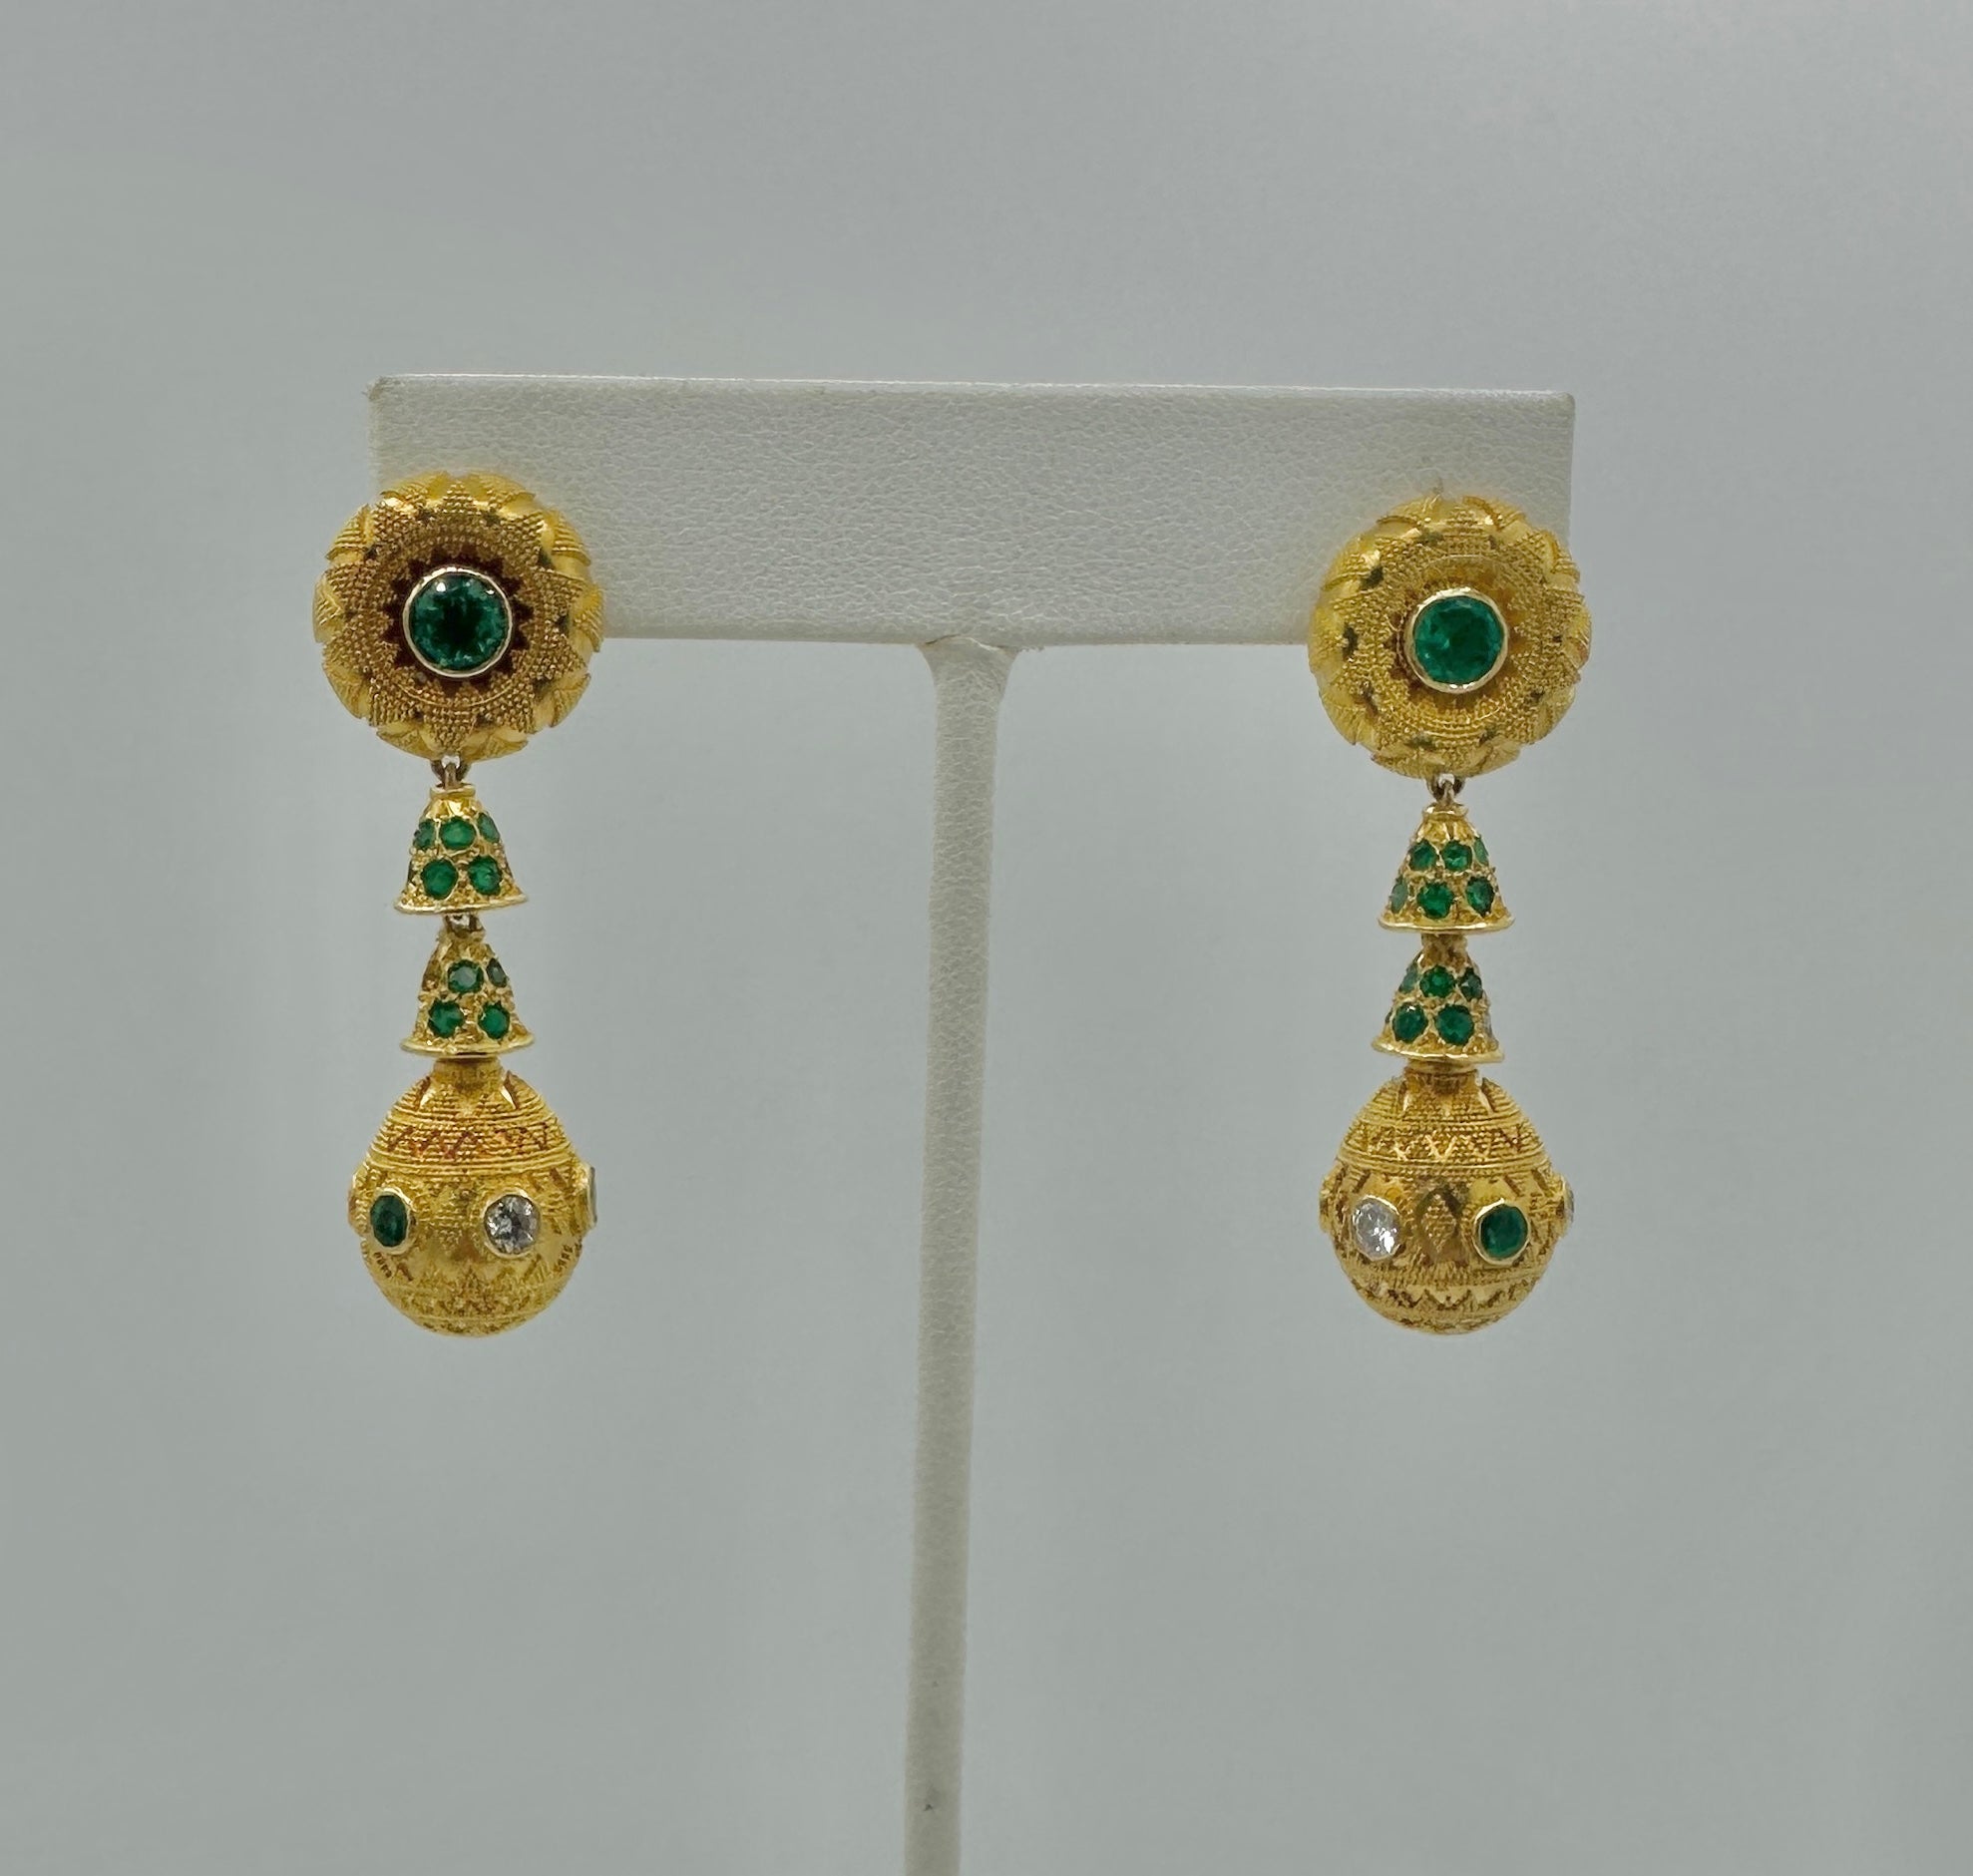 This is a spectacular pair of Emerald and Diamond Etruscan Revival Pendant Dangle Drop Earrings in 22 Karat Yellow Gold.   The  impressive earrings are 1 7/8 inches in length and have four articulated drop sections.  The tops are set with gorgeous